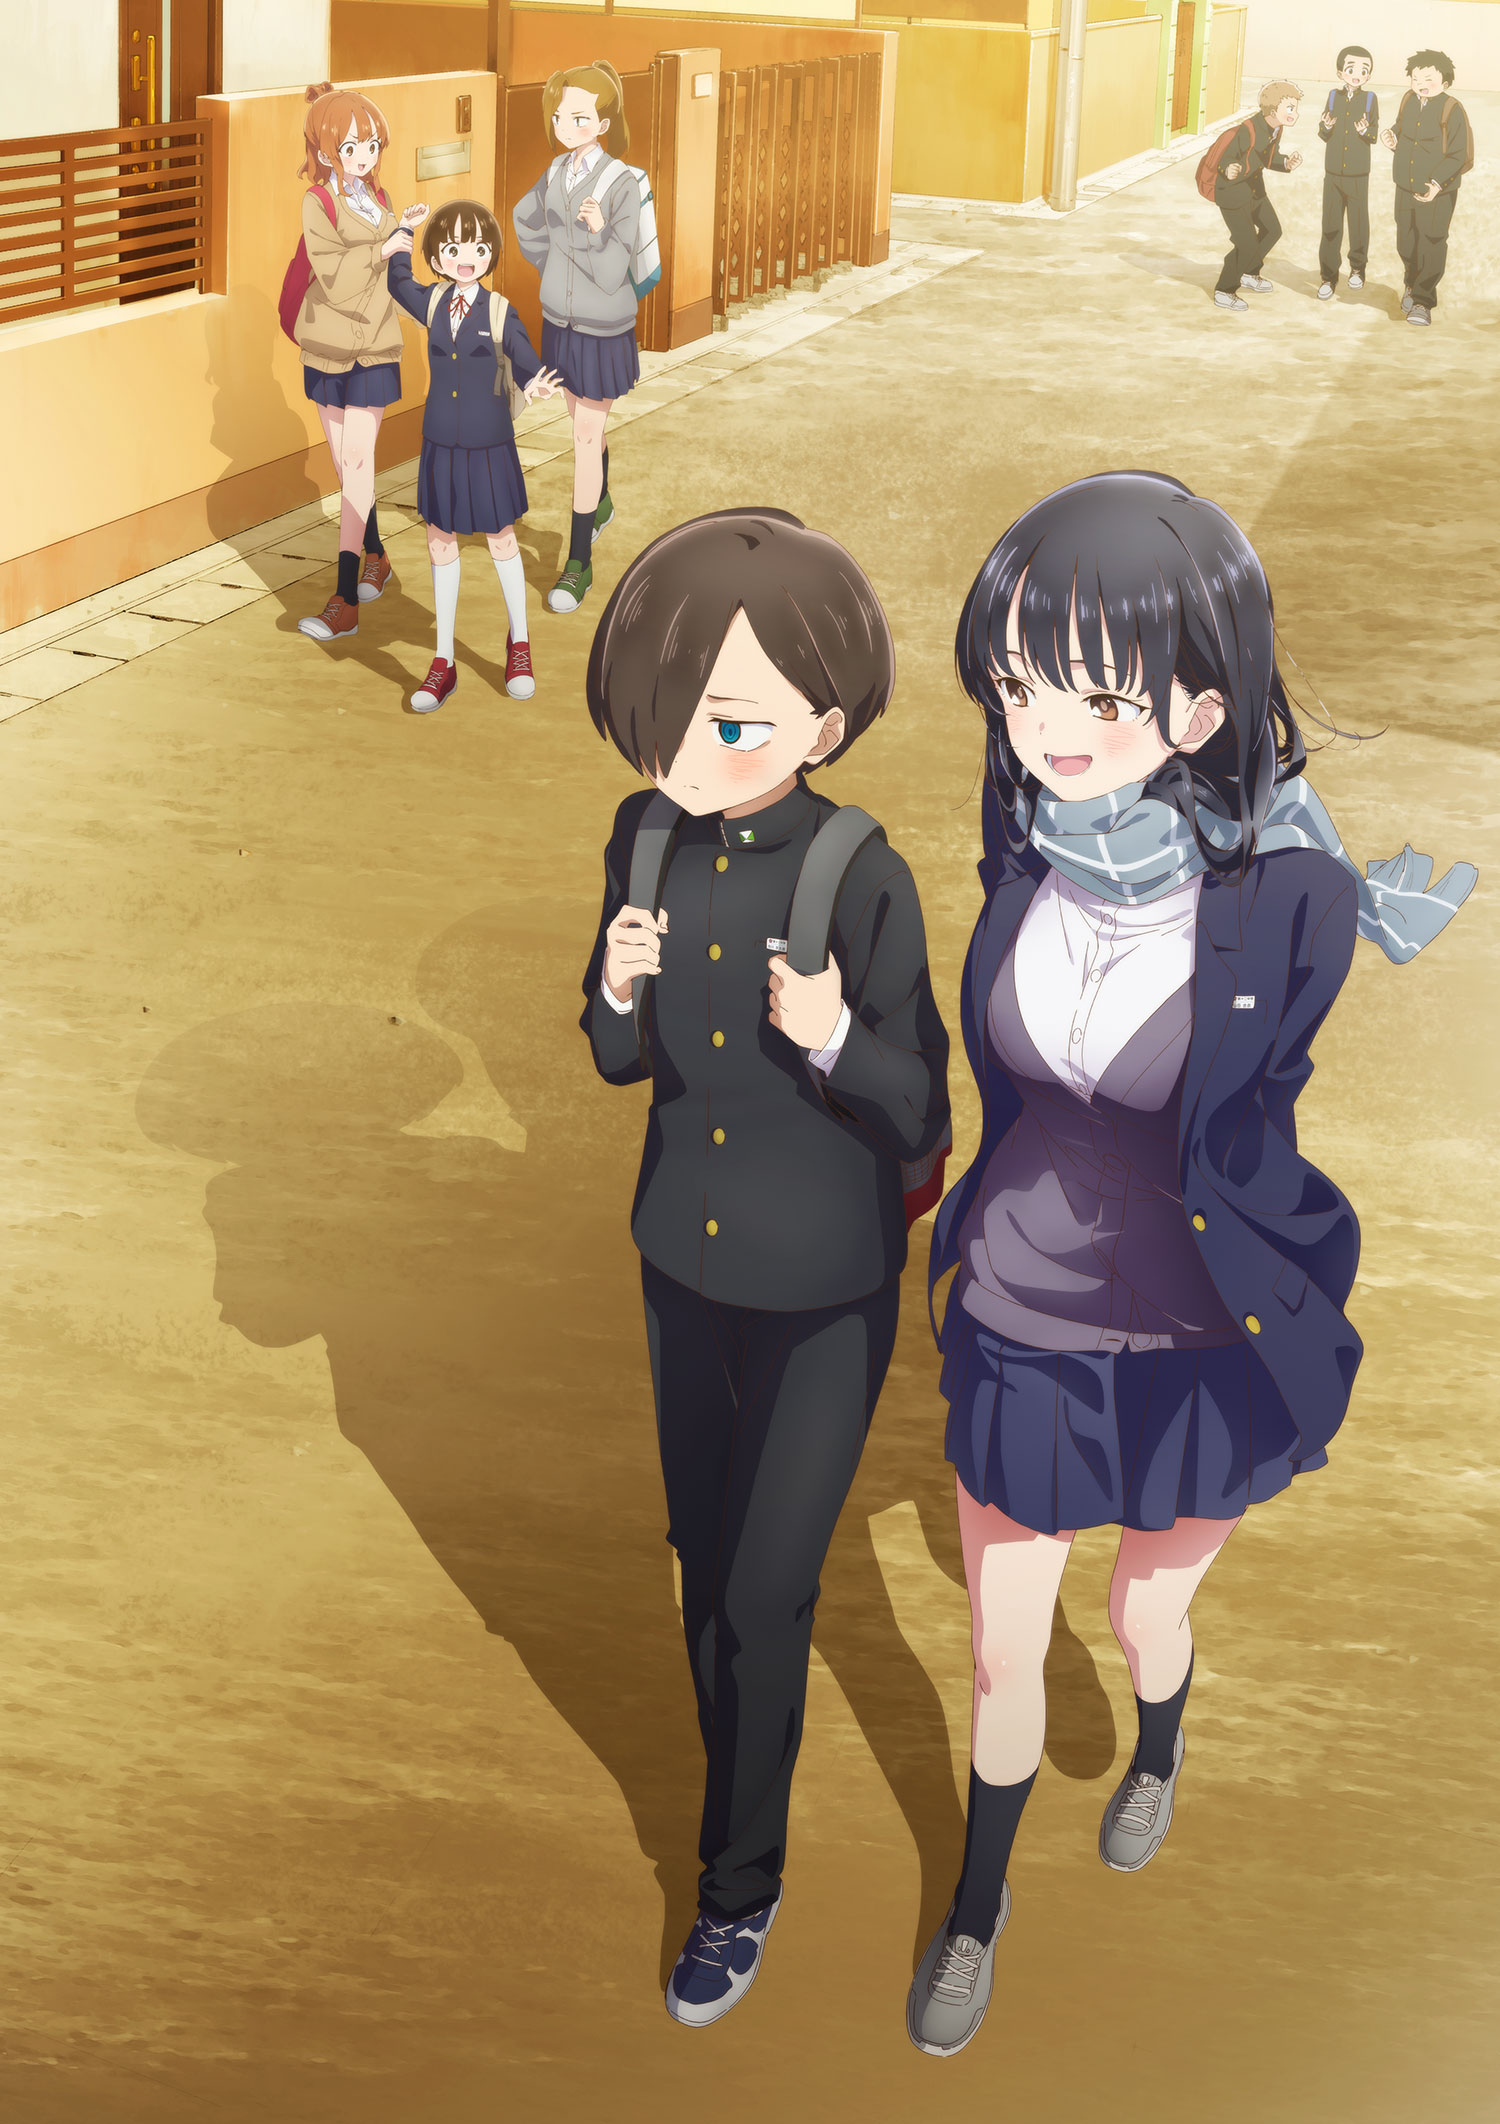 Spoilers] Killing Bites - Episode 12 discussion - FINAL : r/anime